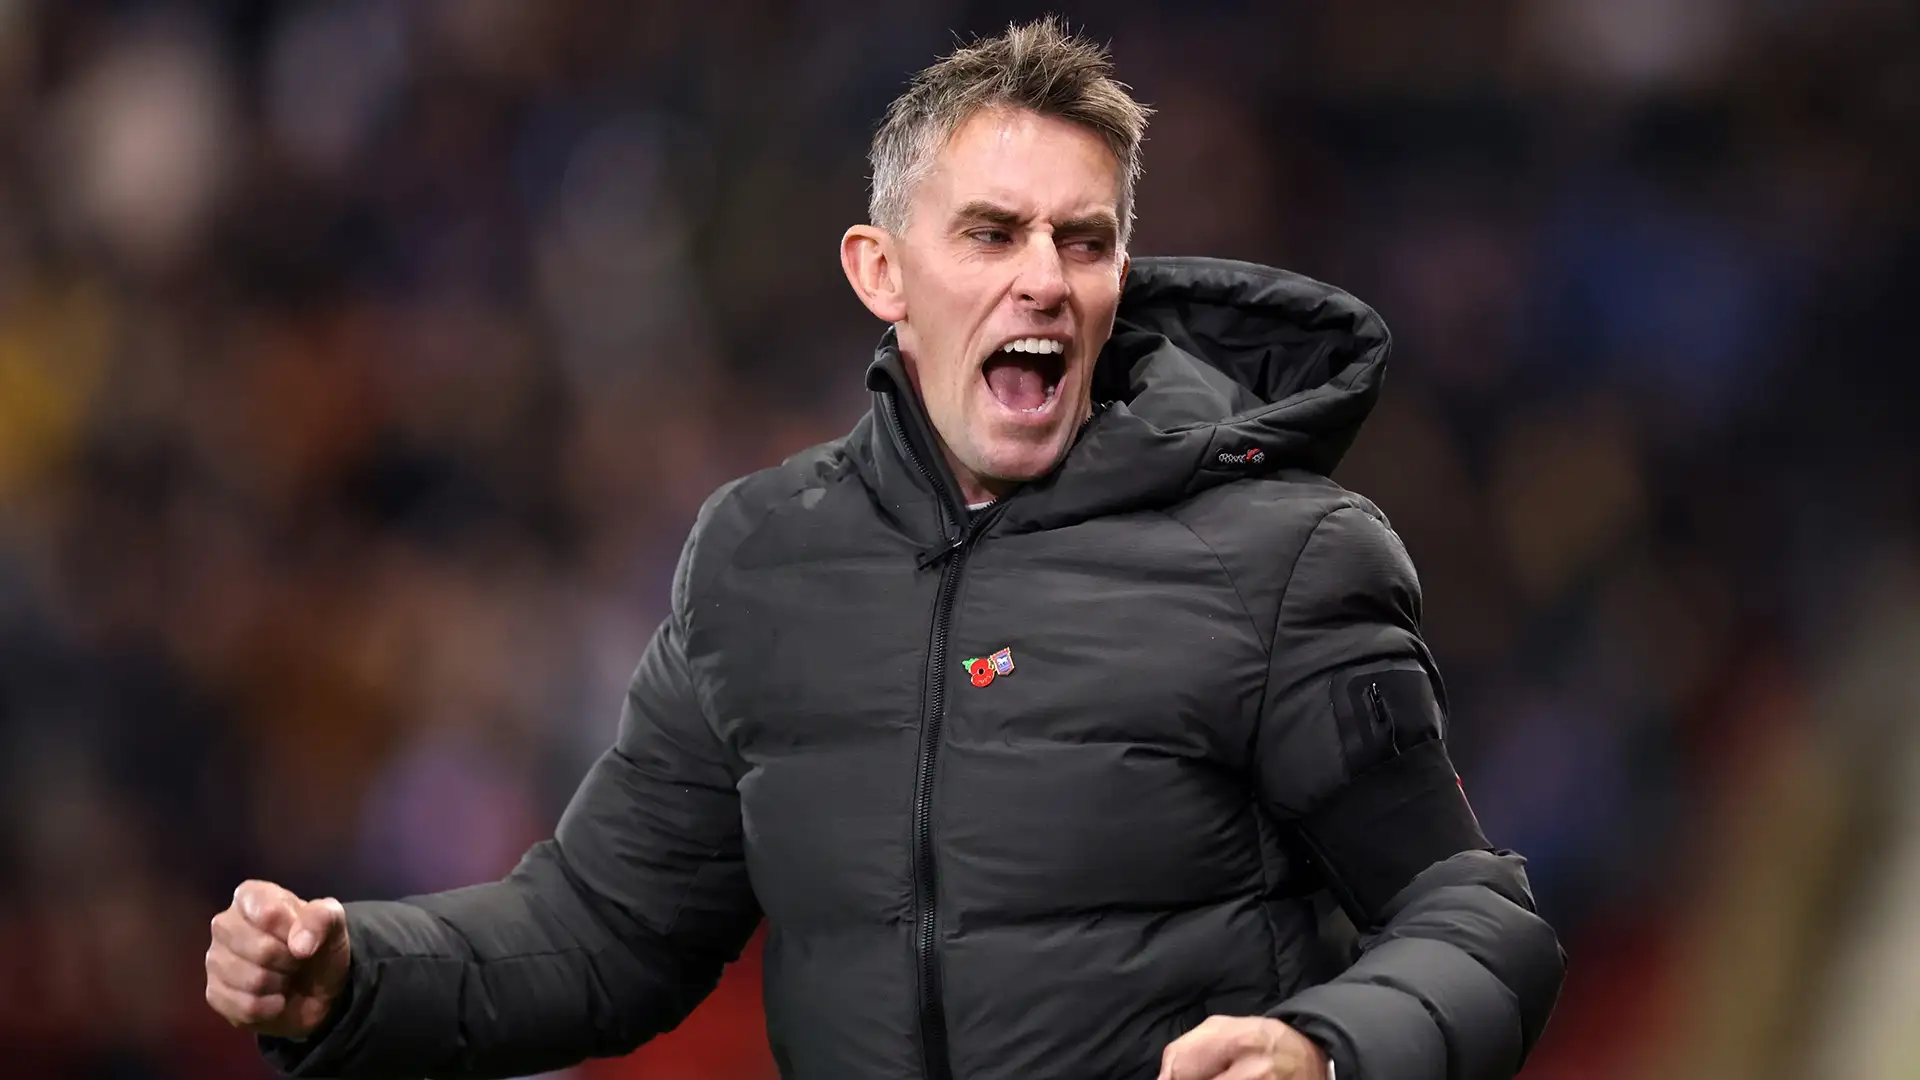 Kieran McKenna STAYS! Ipswich Town boss snubs shock interest from Manchester United and Chelsea to sign new contract with newly-promoted Tractor Boys